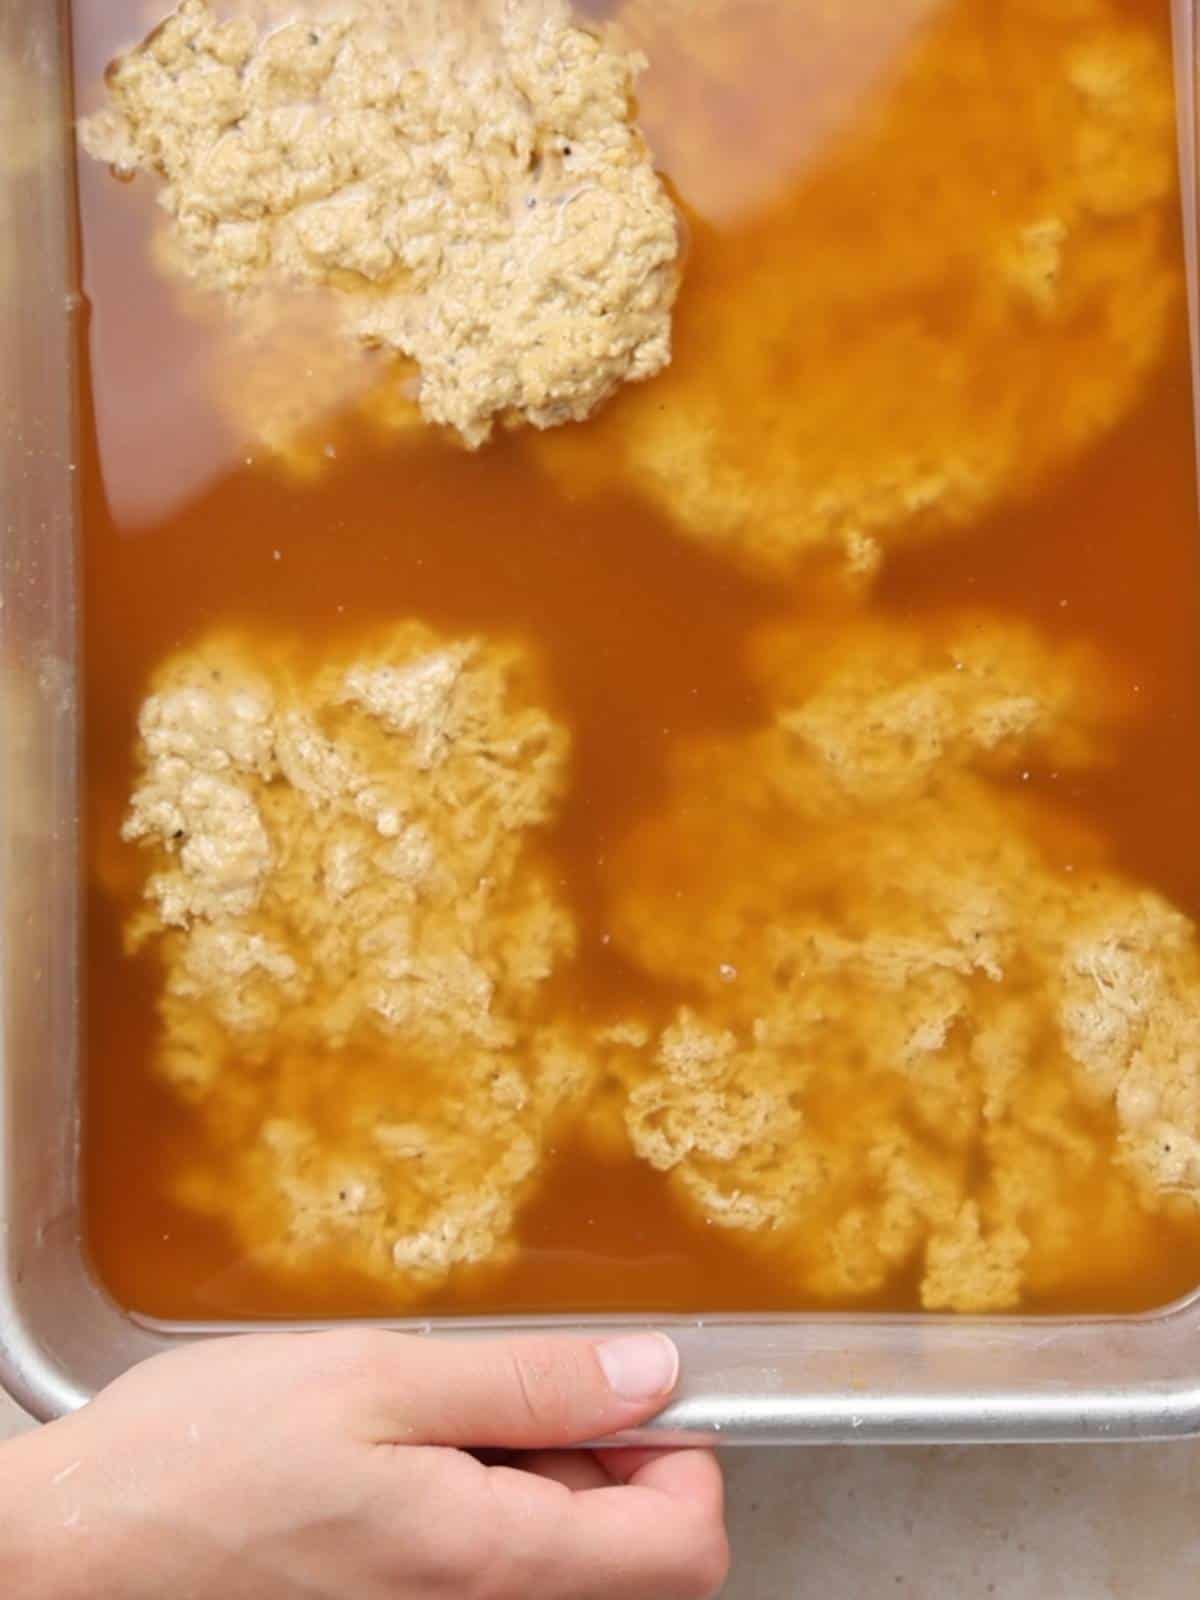 Adding seitan cutlets to broth in a baking dish to cook.